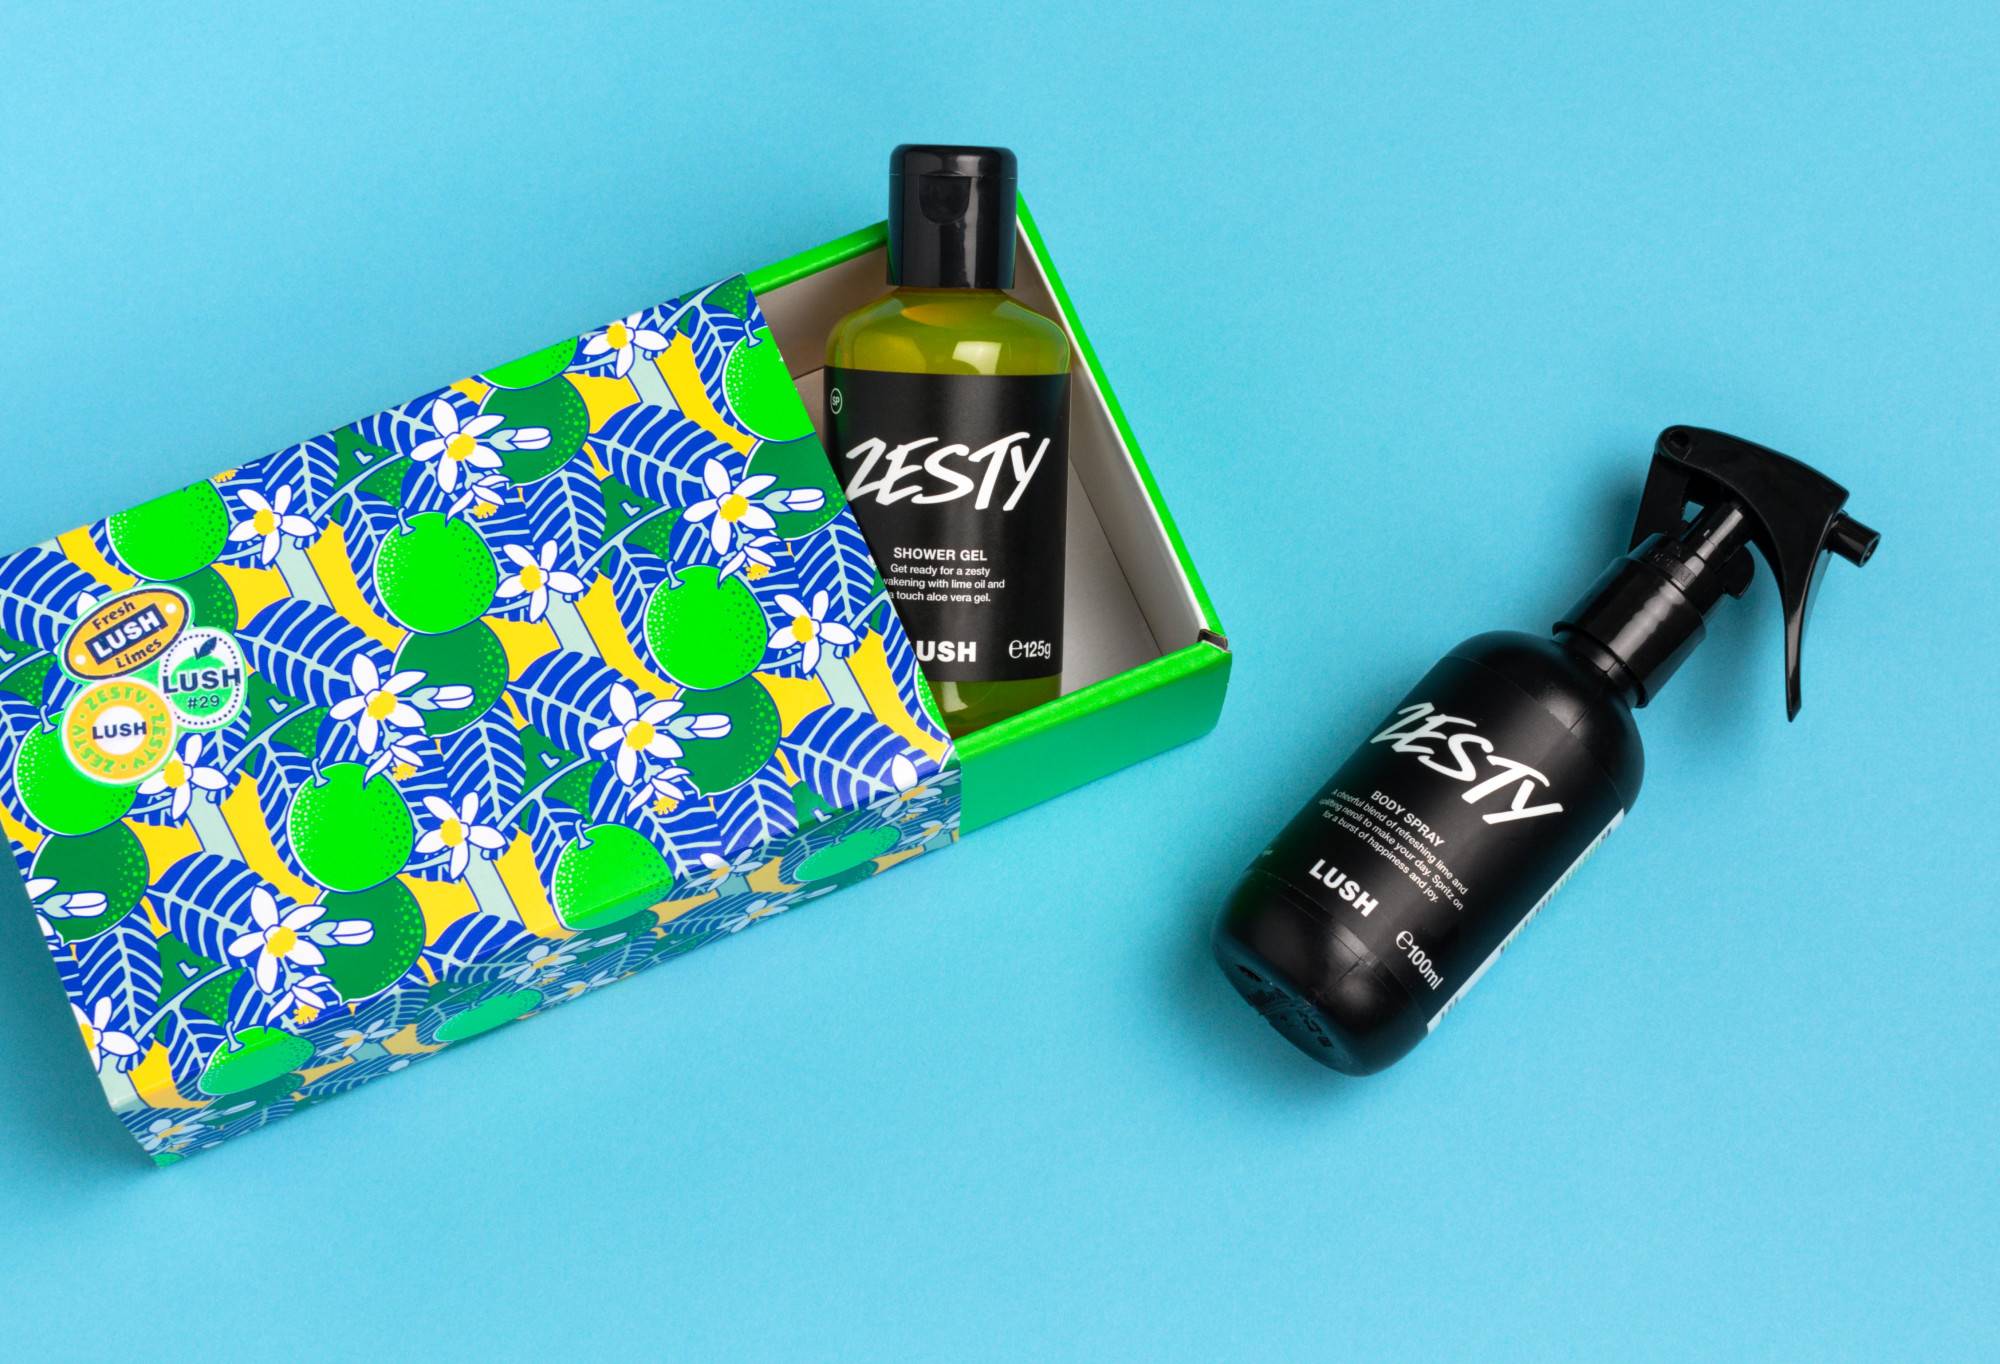 Zesty (the gift) box and its contents (100ml Body Spray and 100g Shower Gel) are displayed on a light blue background.